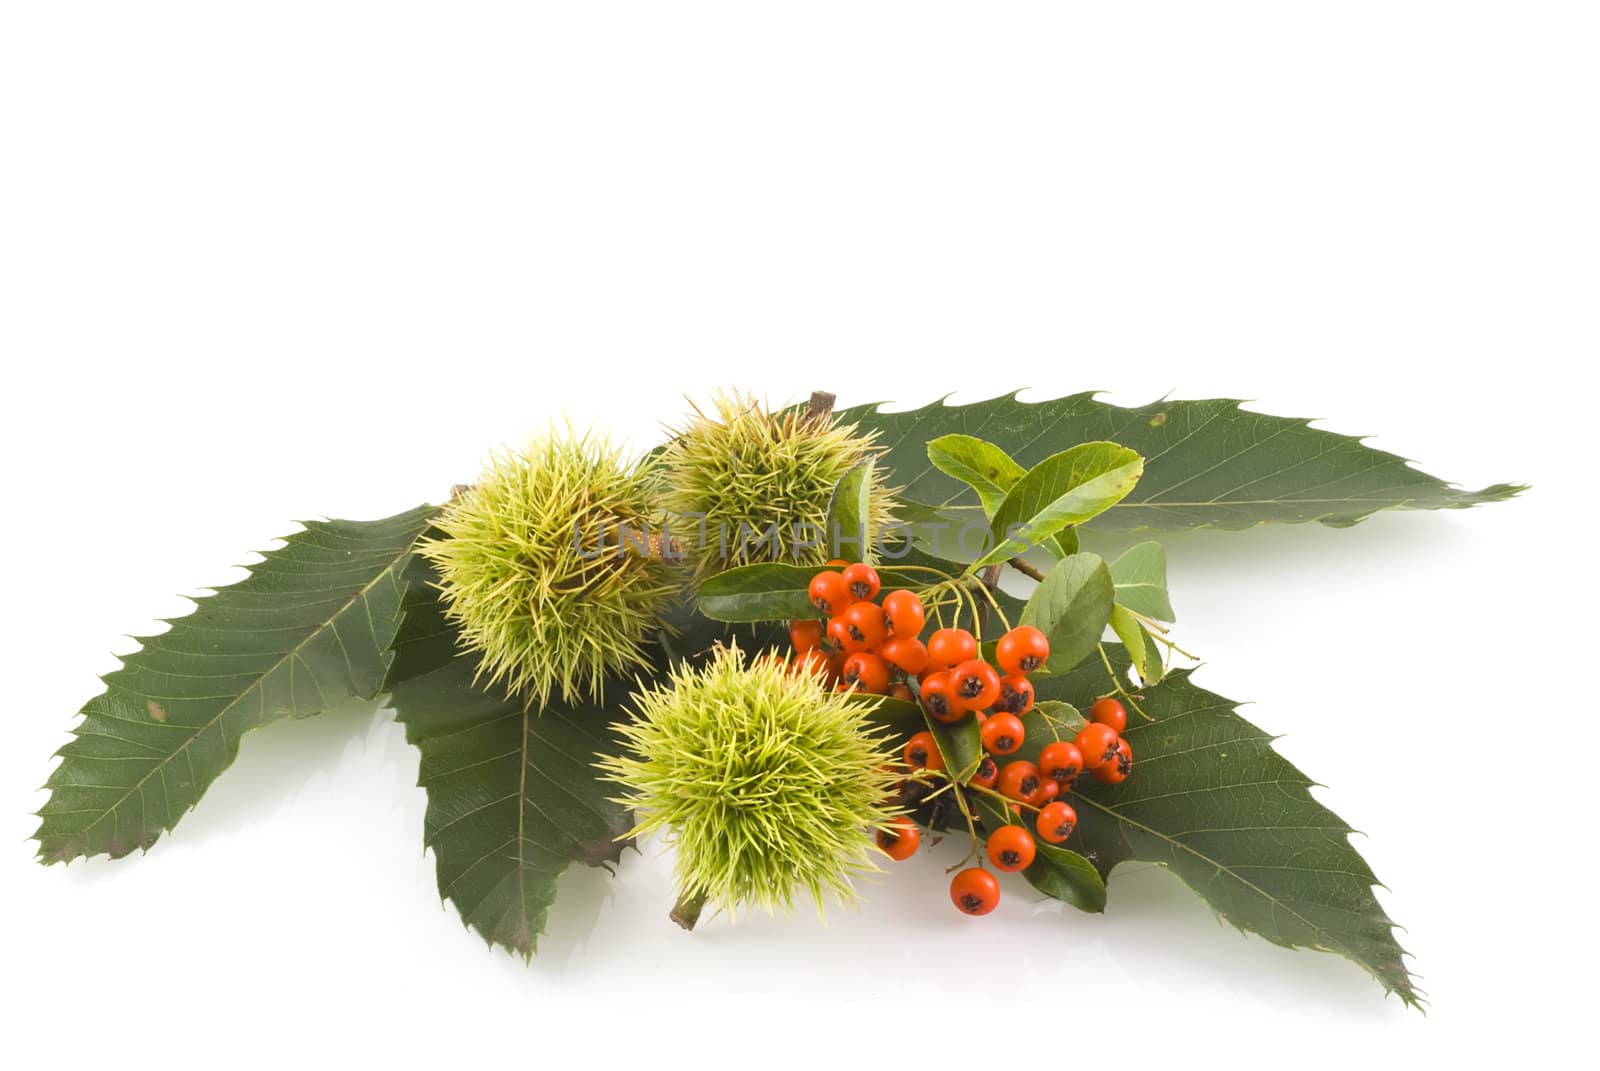 Chestnut leaves with young chestnuts and orange berries on white.                  